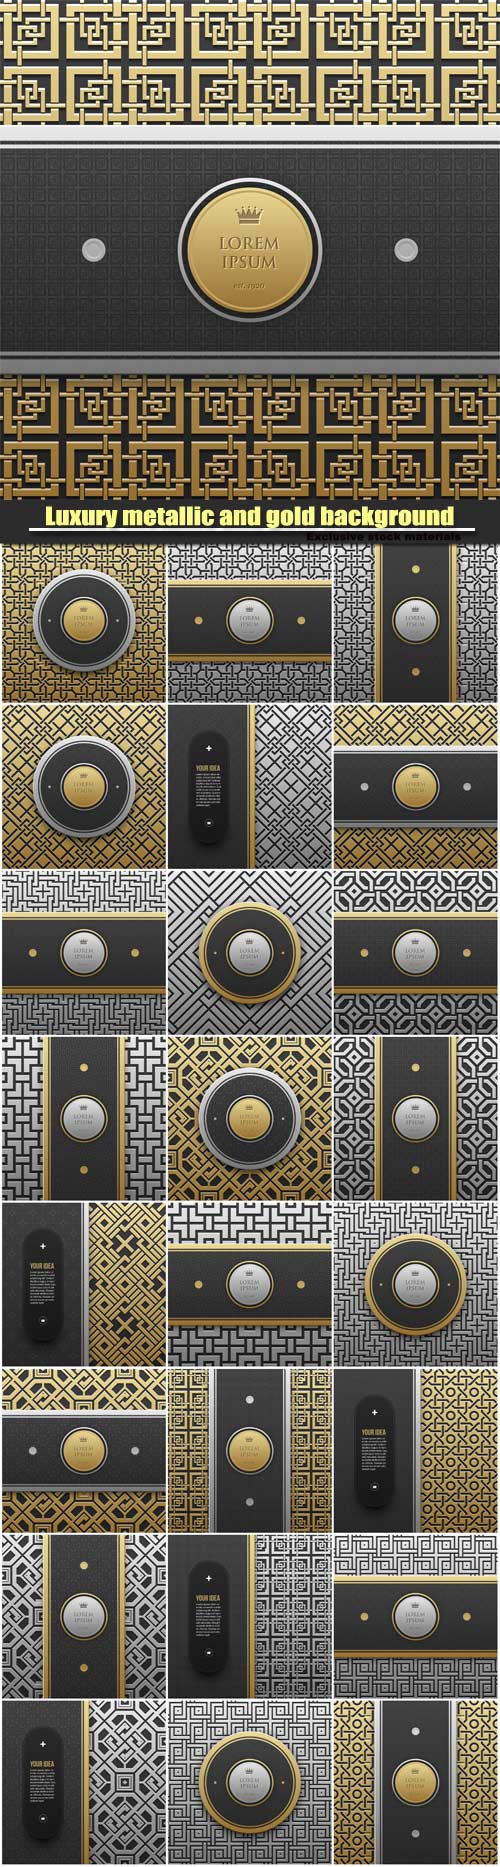 Luxury metallic and gold background with seamless geometric pattern